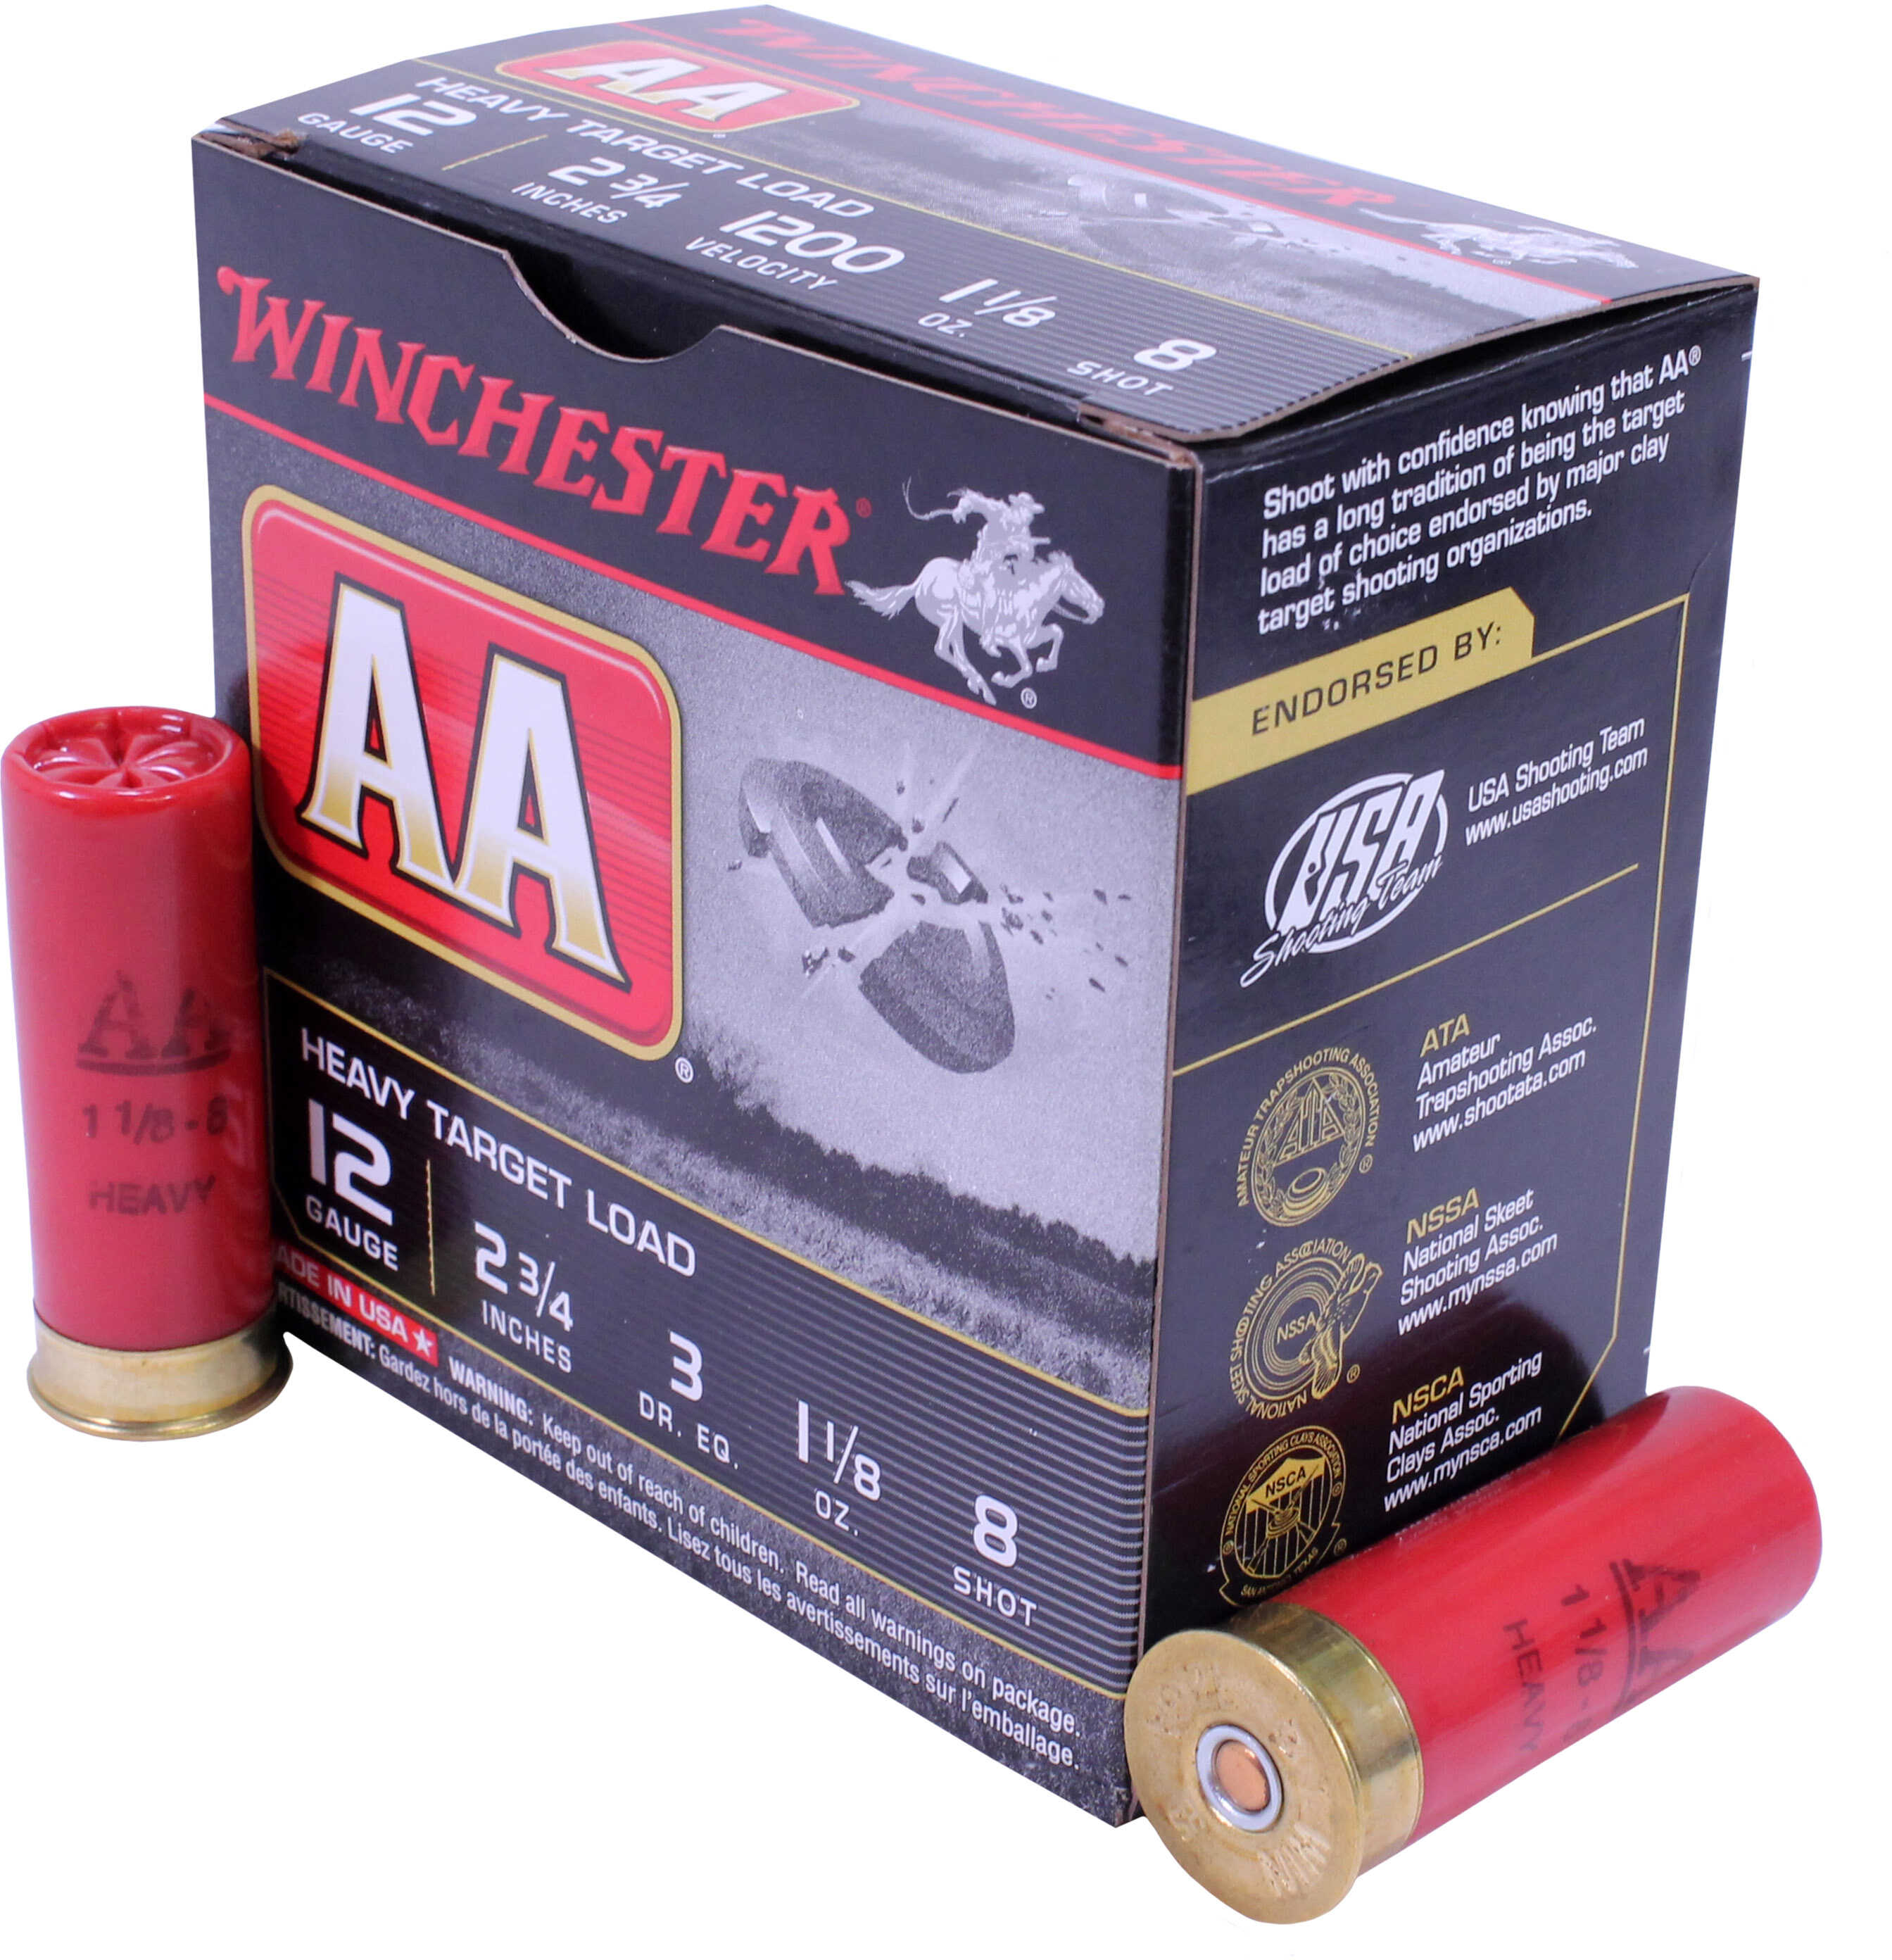 rounds-of-gauge-shot-winchester-aa-heavy-target-ammo-at-my-xxx-hot-girl